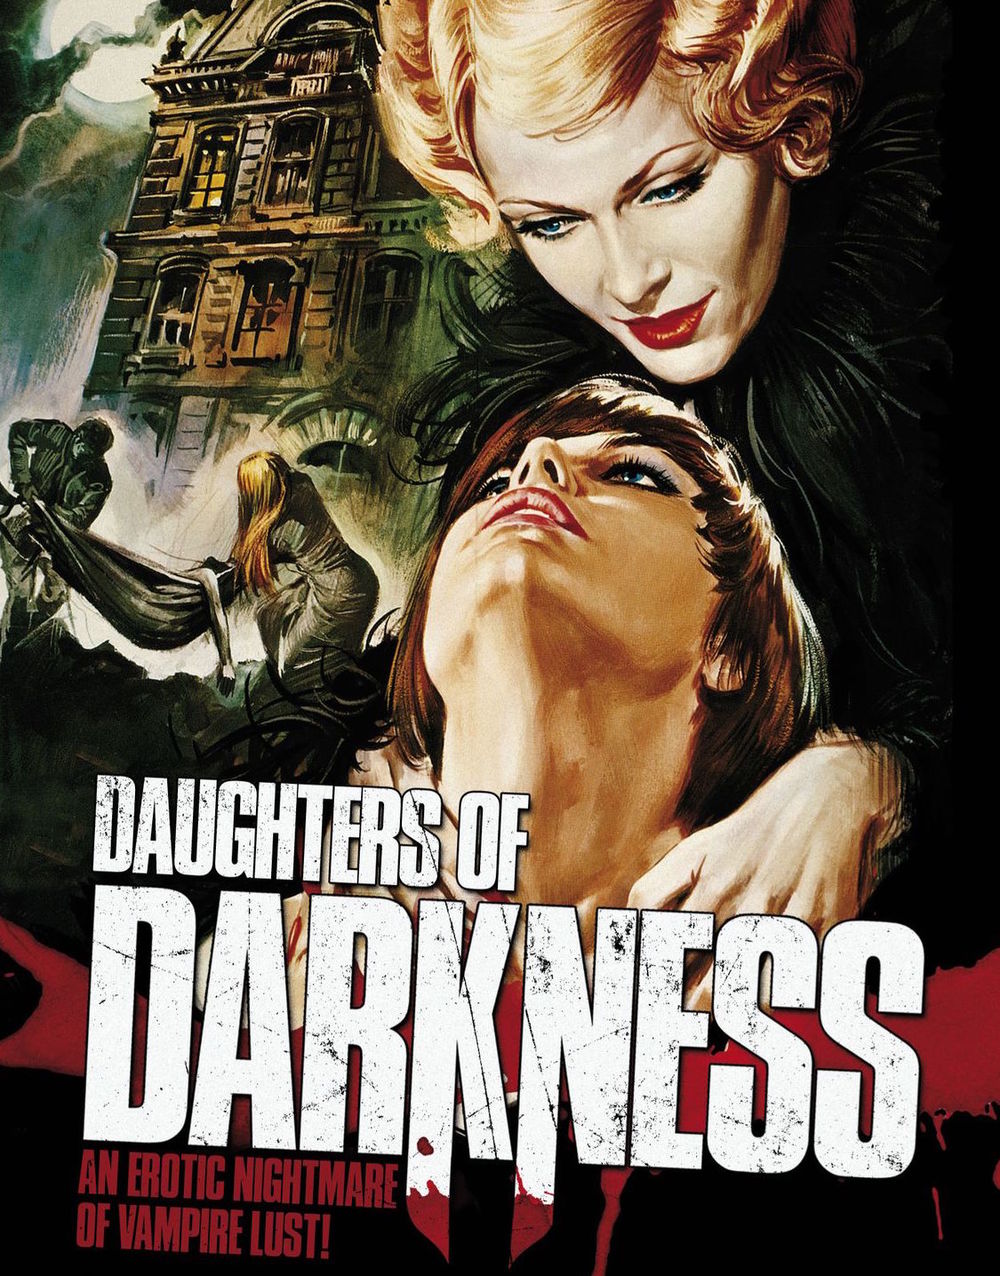 Daughters of Darkness - curated by John Dwyer